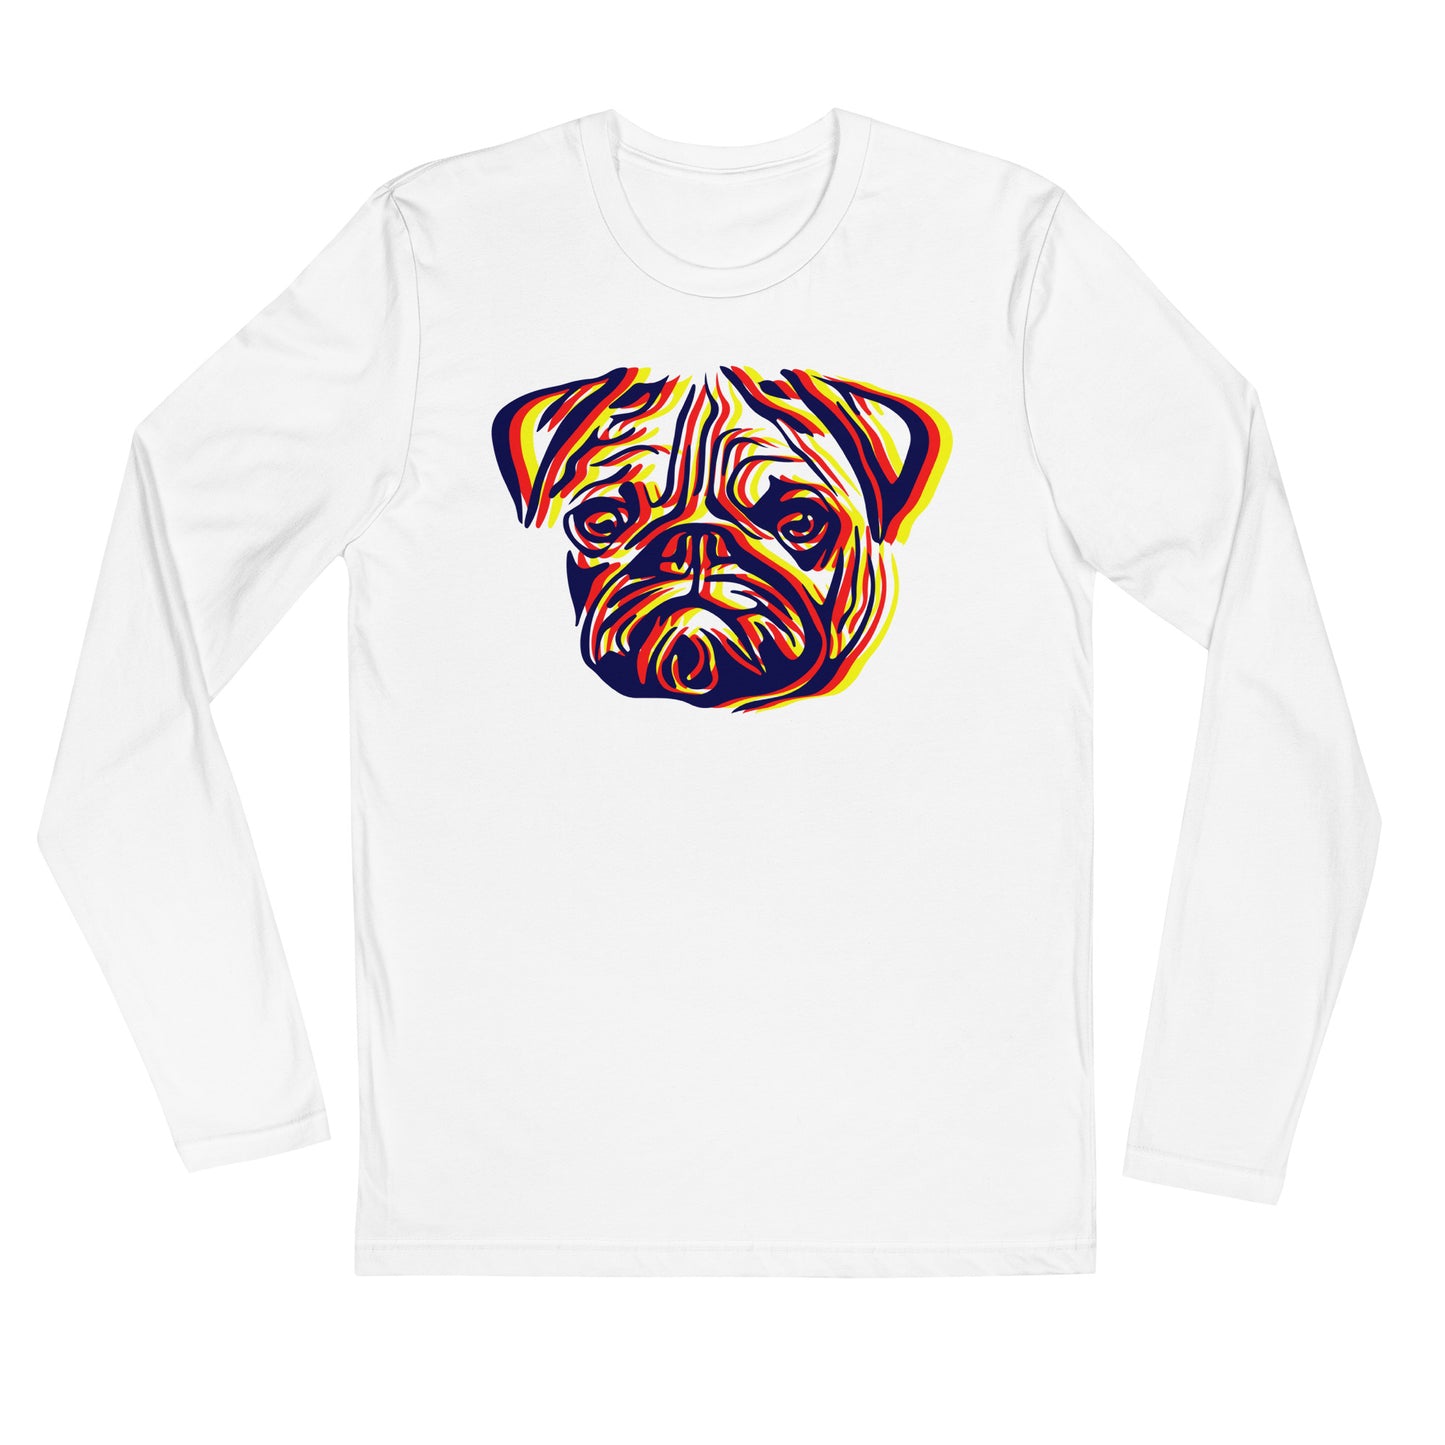 Anaglyph Pug face on unisex white long sleeve t-shirt